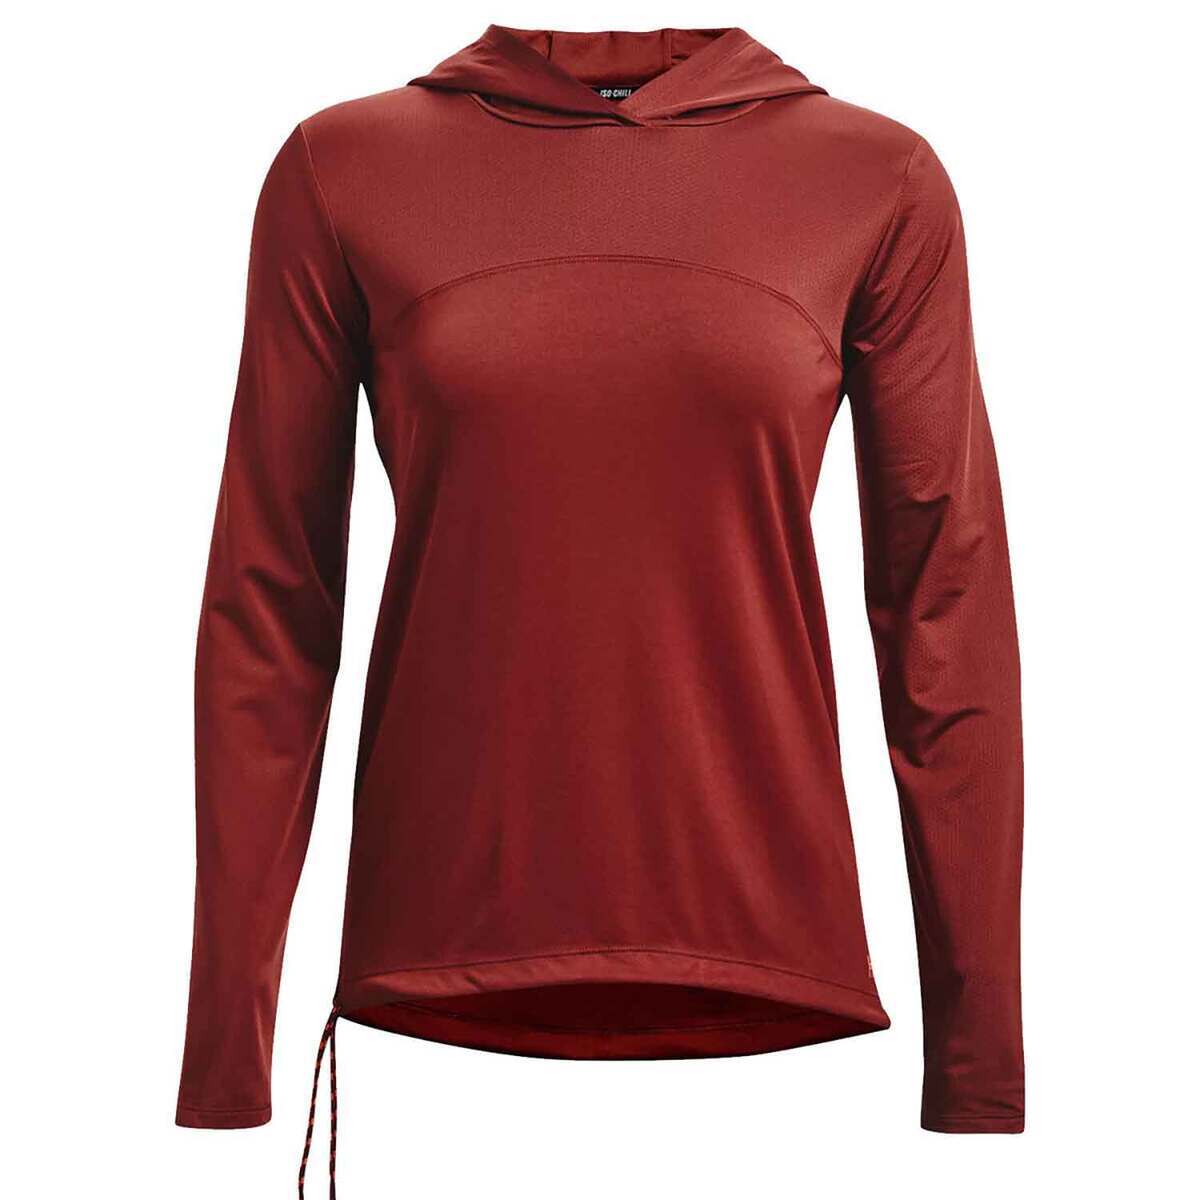 Under Armour Women's Iso-Chill Shore Break Casual Hoodie